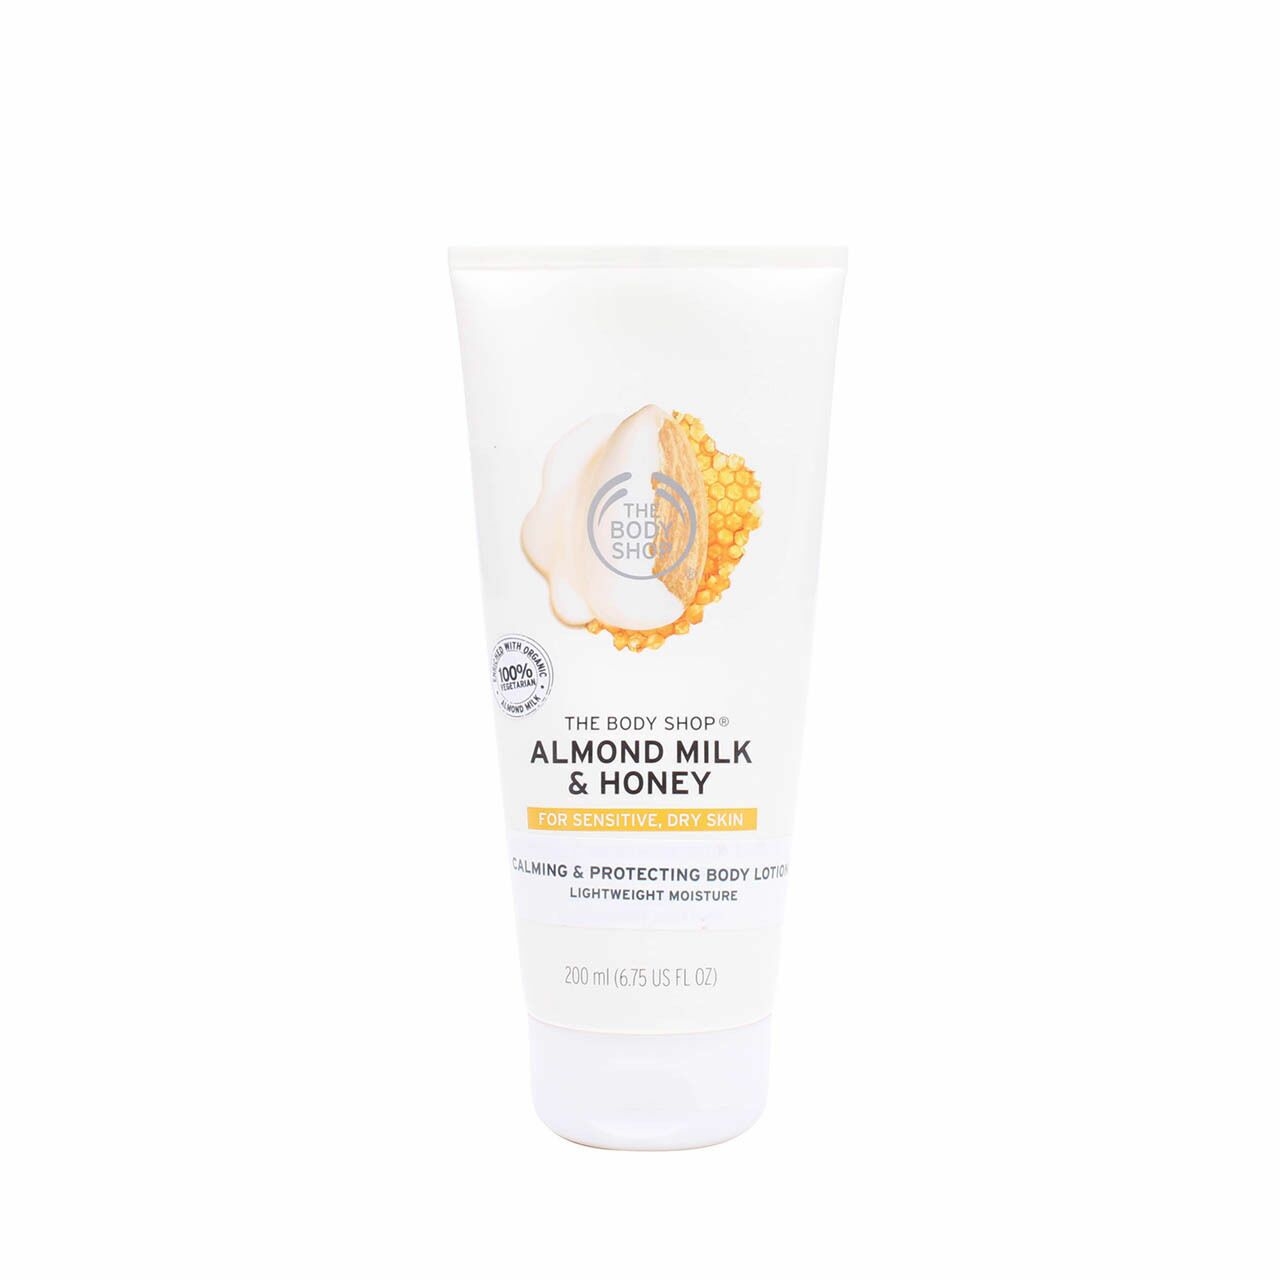 The Body Shop Almond Milk & Honey Calming & Protecting Body Lotion Body Care